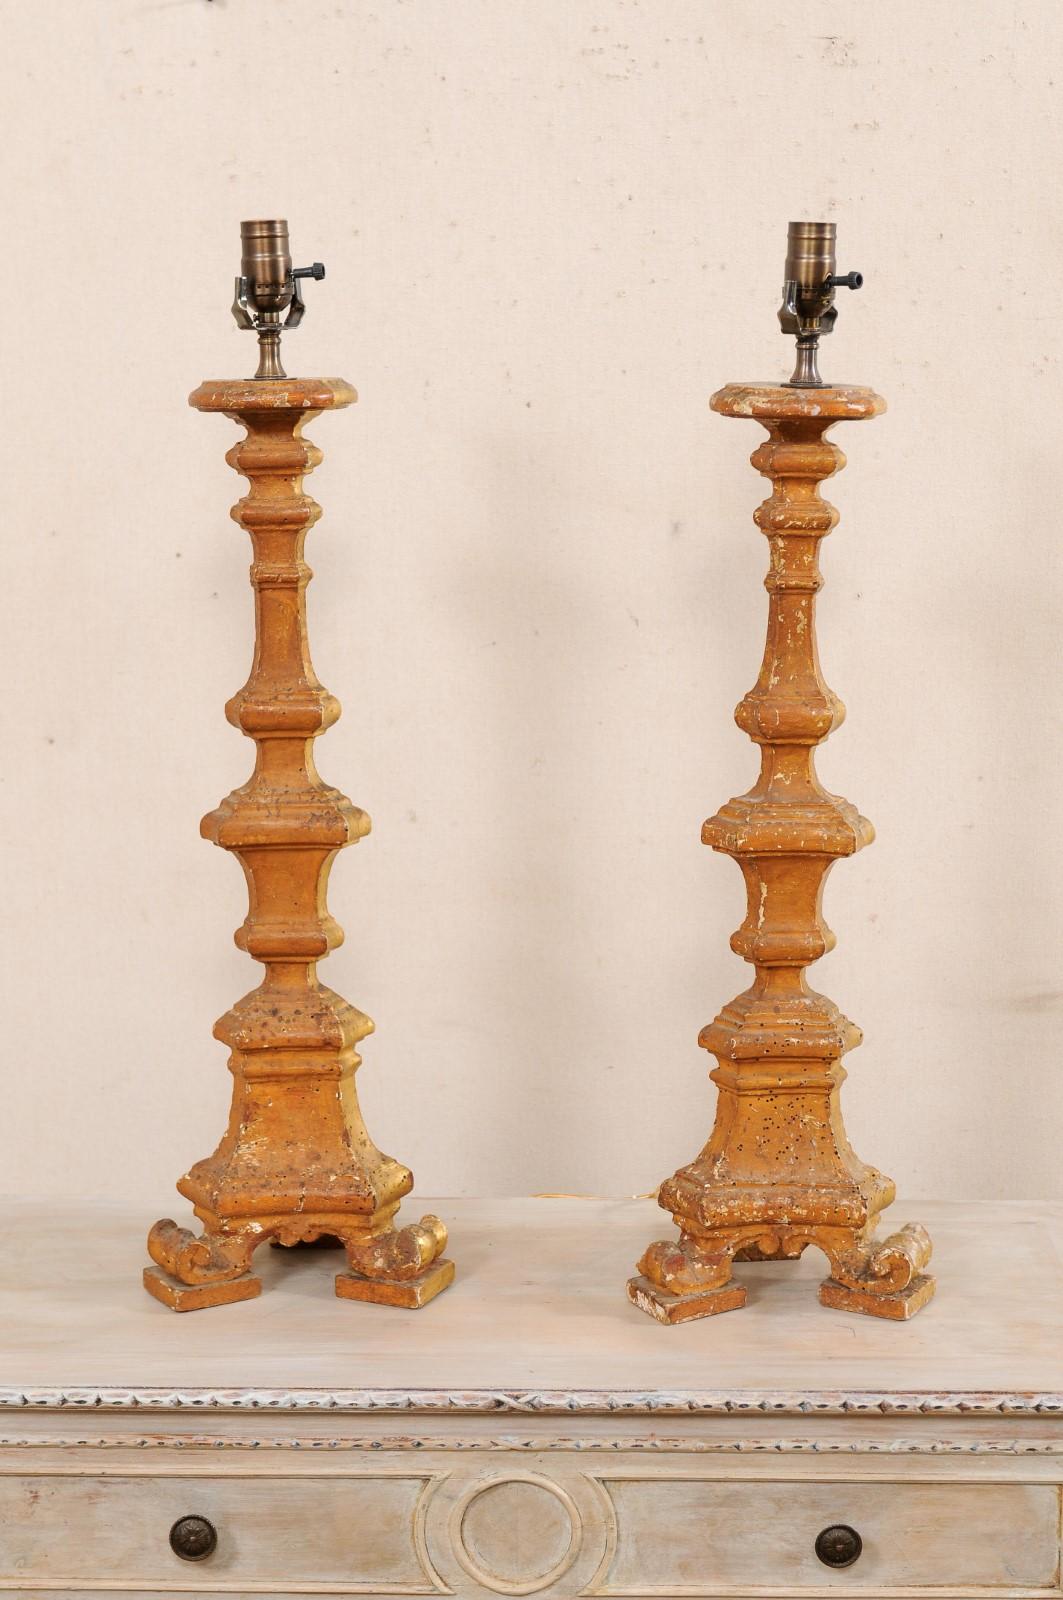 A pair of 19th century Italian candlestick lamps with their original gilt finish. This antique pair of table lamps from Italy each feature a 19th century hand-carved wooden candlesticks, with a circular neck (where the candlestick would have